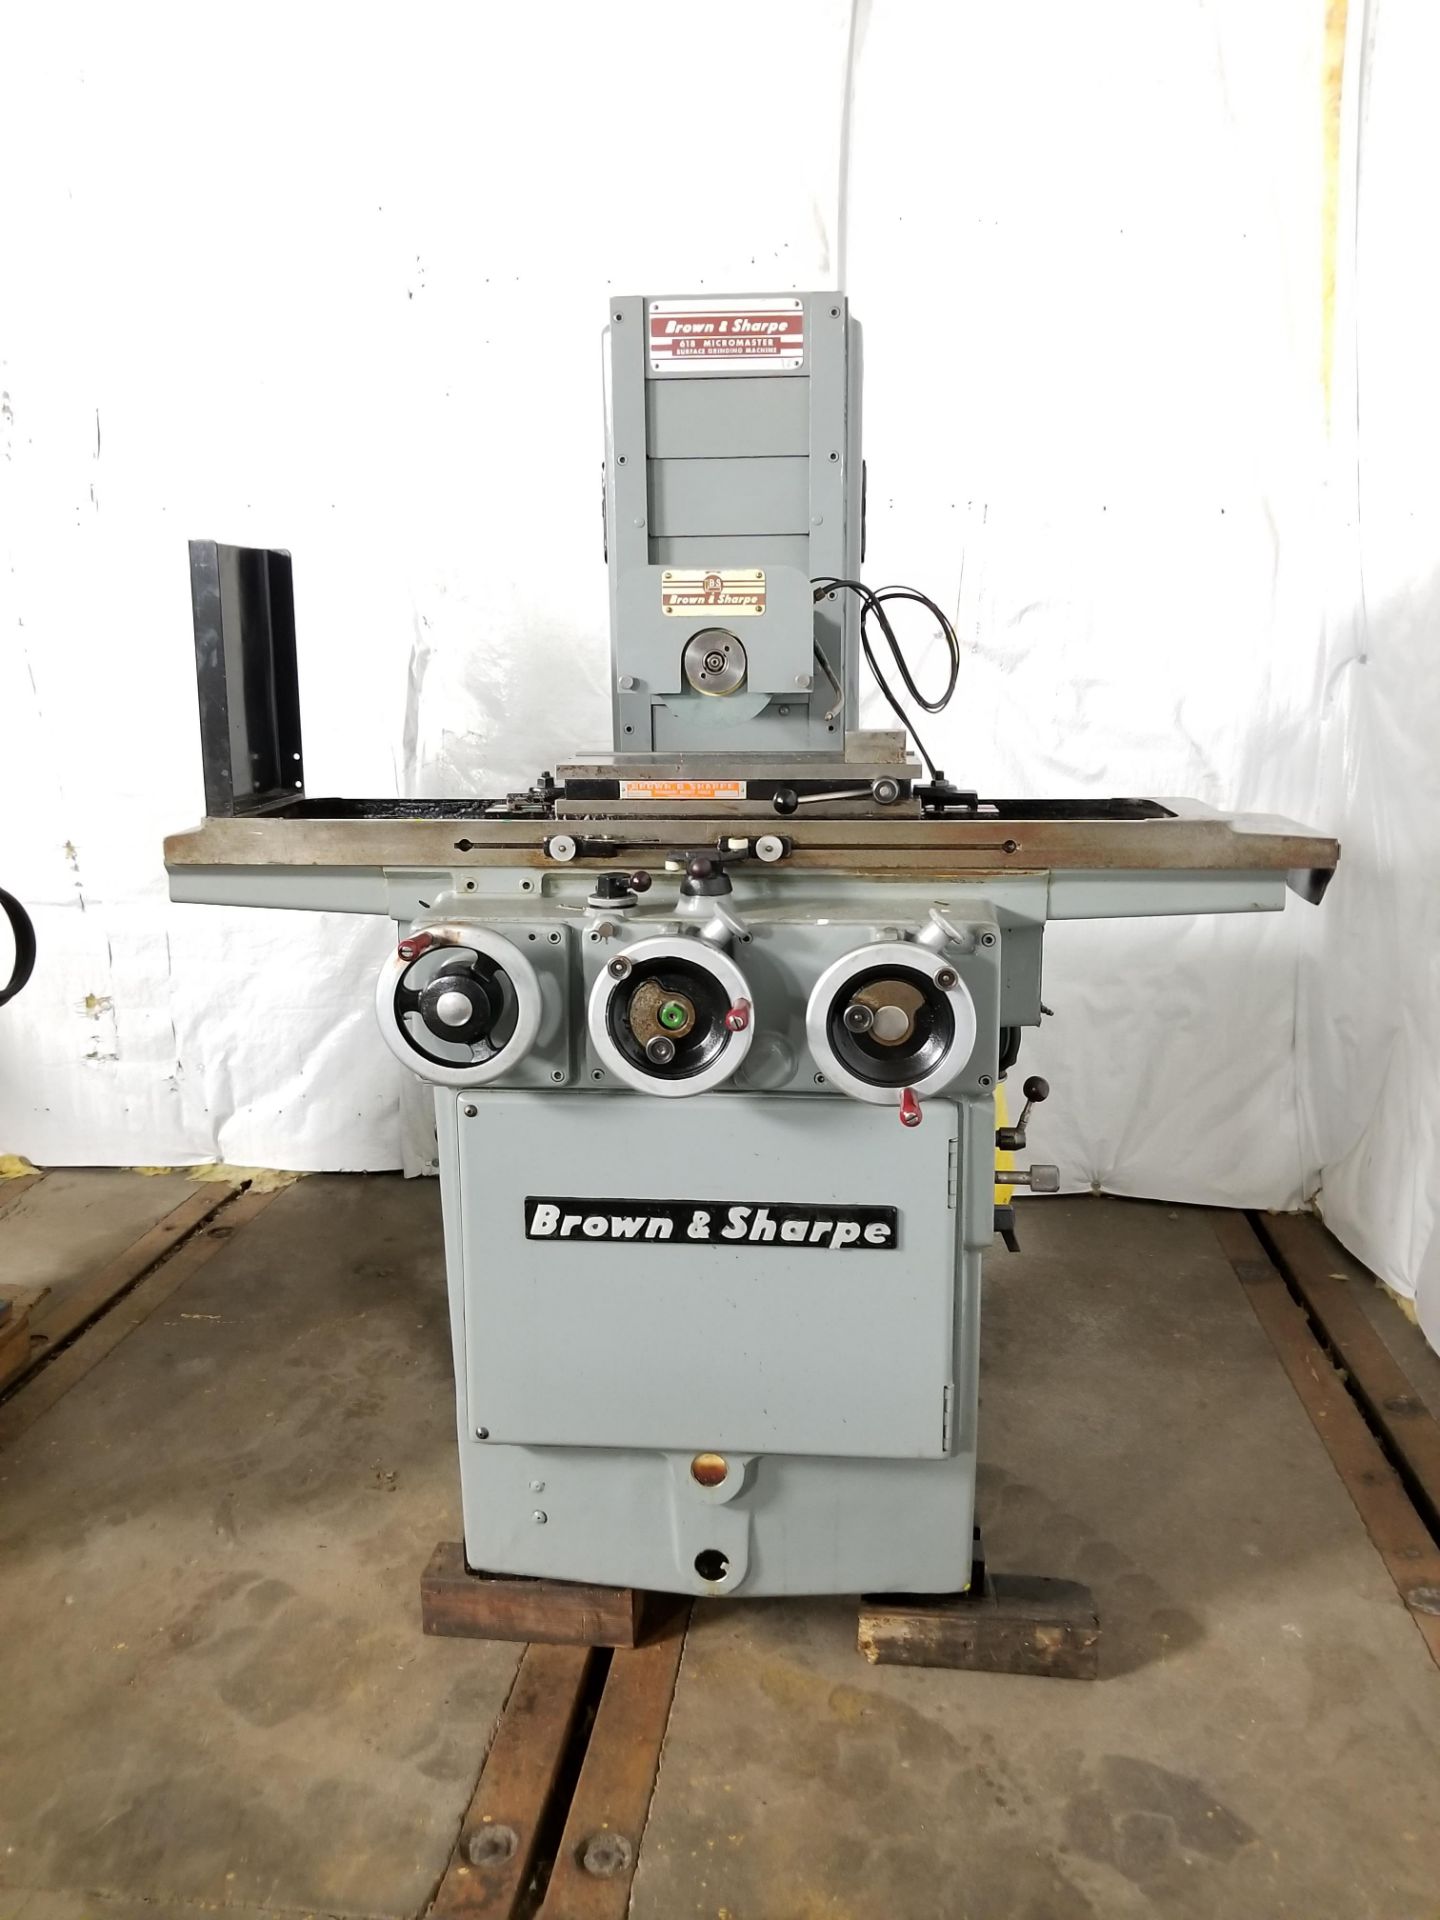 1966 BROWN & SHARPE MICROMASTER HYDRAULIC SURFACE GRINDER, MODEL 618, B&S PERMANENT MAGNETIC - Image 2 of 5